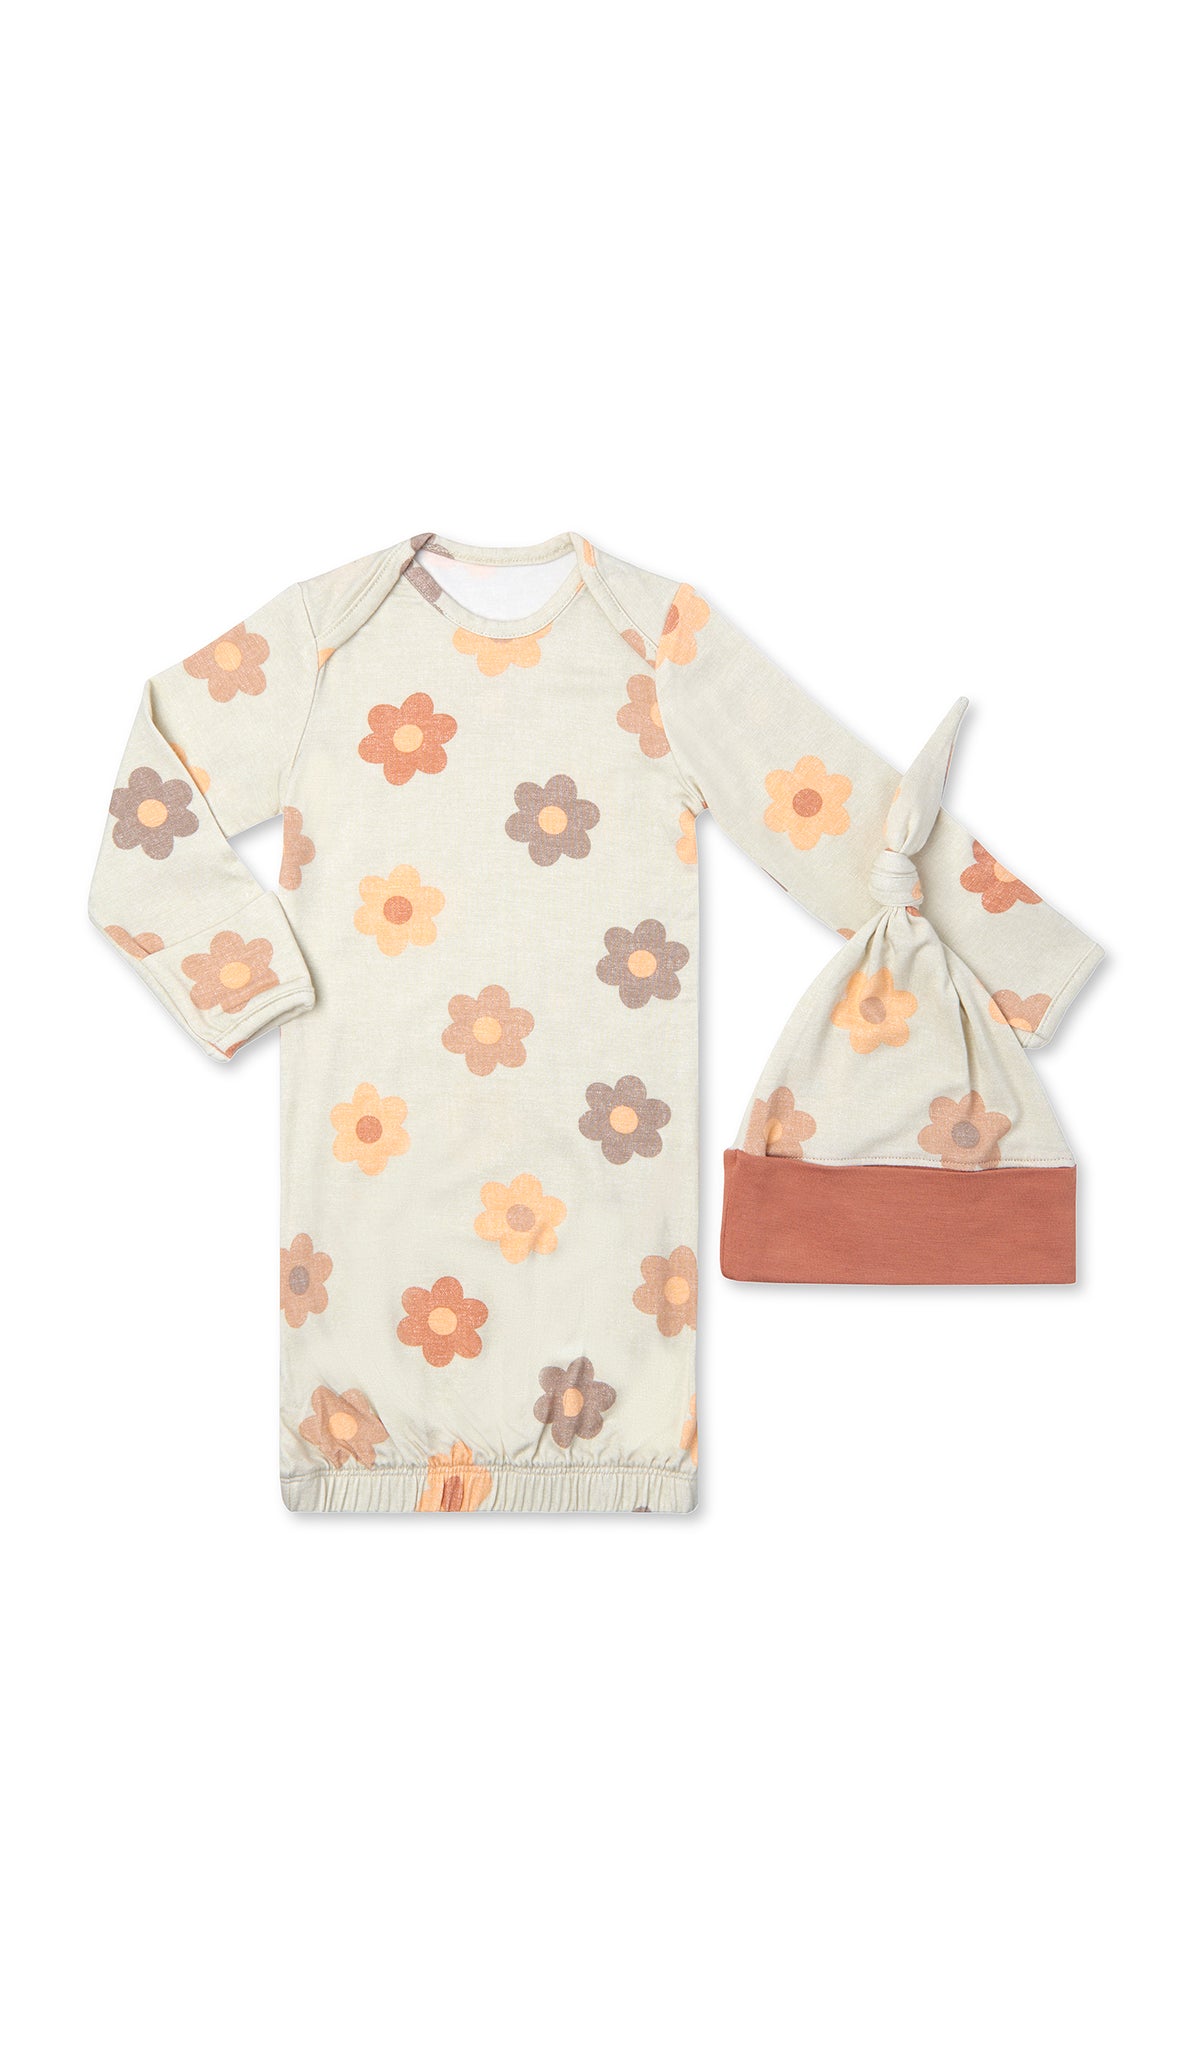 Daisies Analise 5-Piece Set, gown and knotted hat for baby.